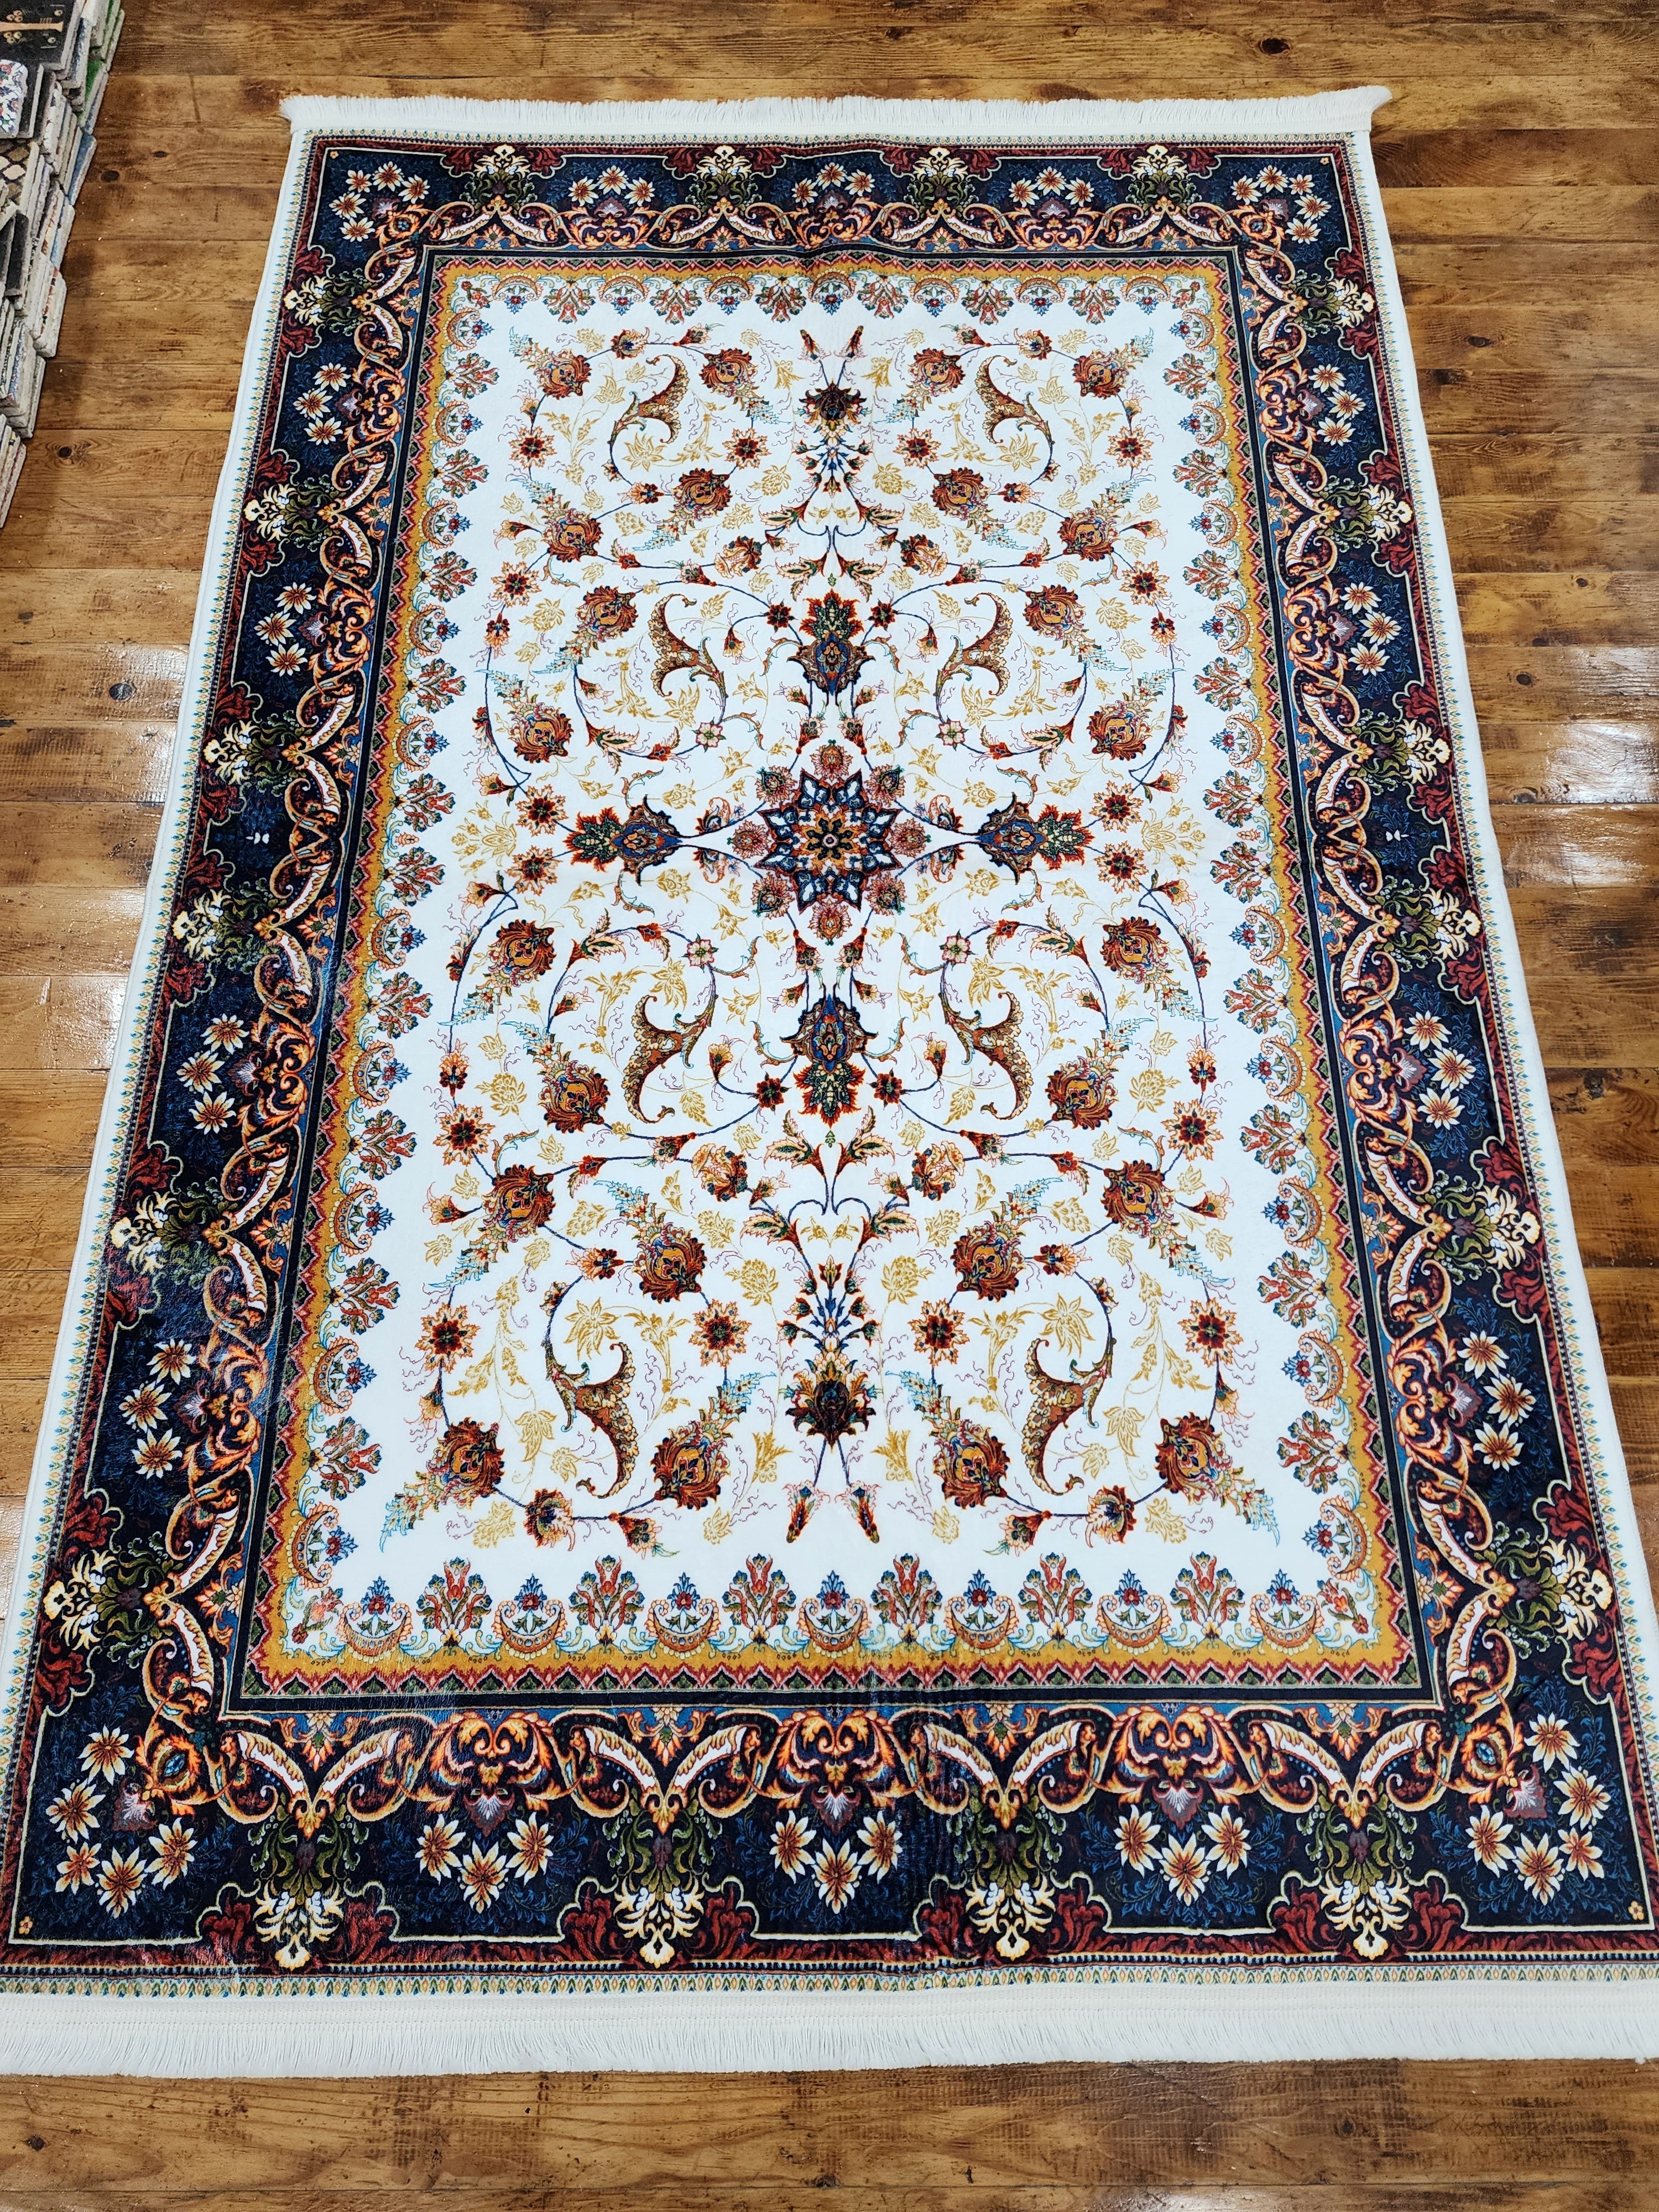 TURKISH BAMBOO SILK RUG, PERSIAN STYLE ORIENTAL VISCOSE SILK FLOOR RUG FOR HALL ENTRY LIVING ROOM OR BEDROOM 4 FT X 6 FT